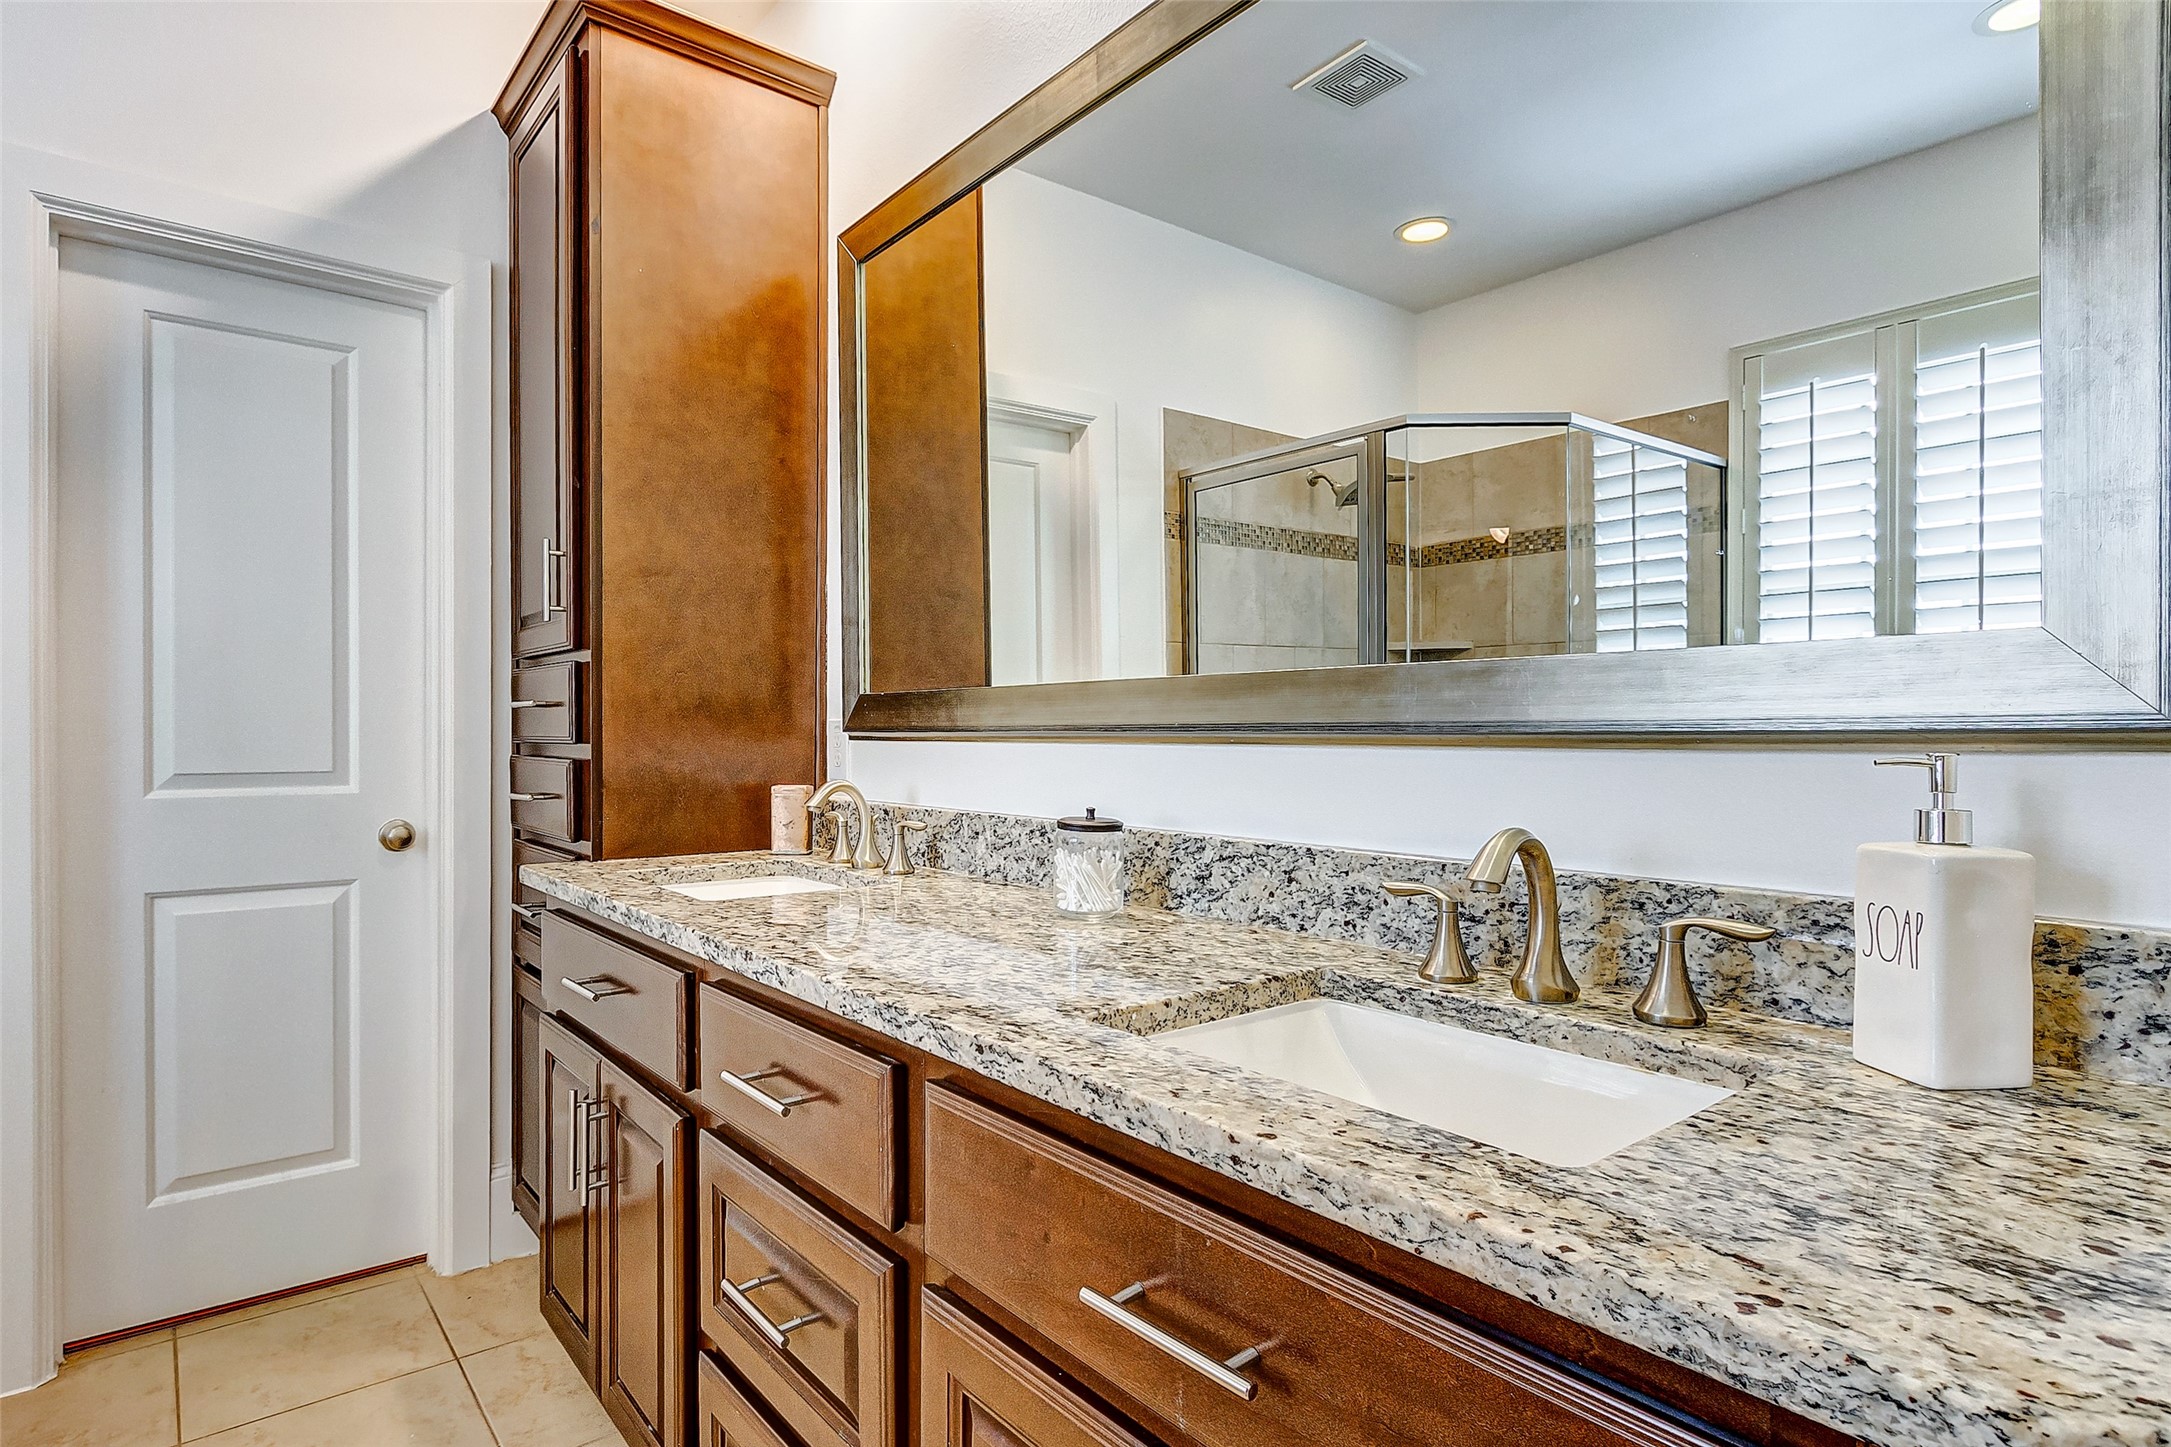 Your stunning primary ensuite bathroom features granite countertops, dual sinks, rich vanity cabinetry, oversized framed mirror, and plentiful storage space!